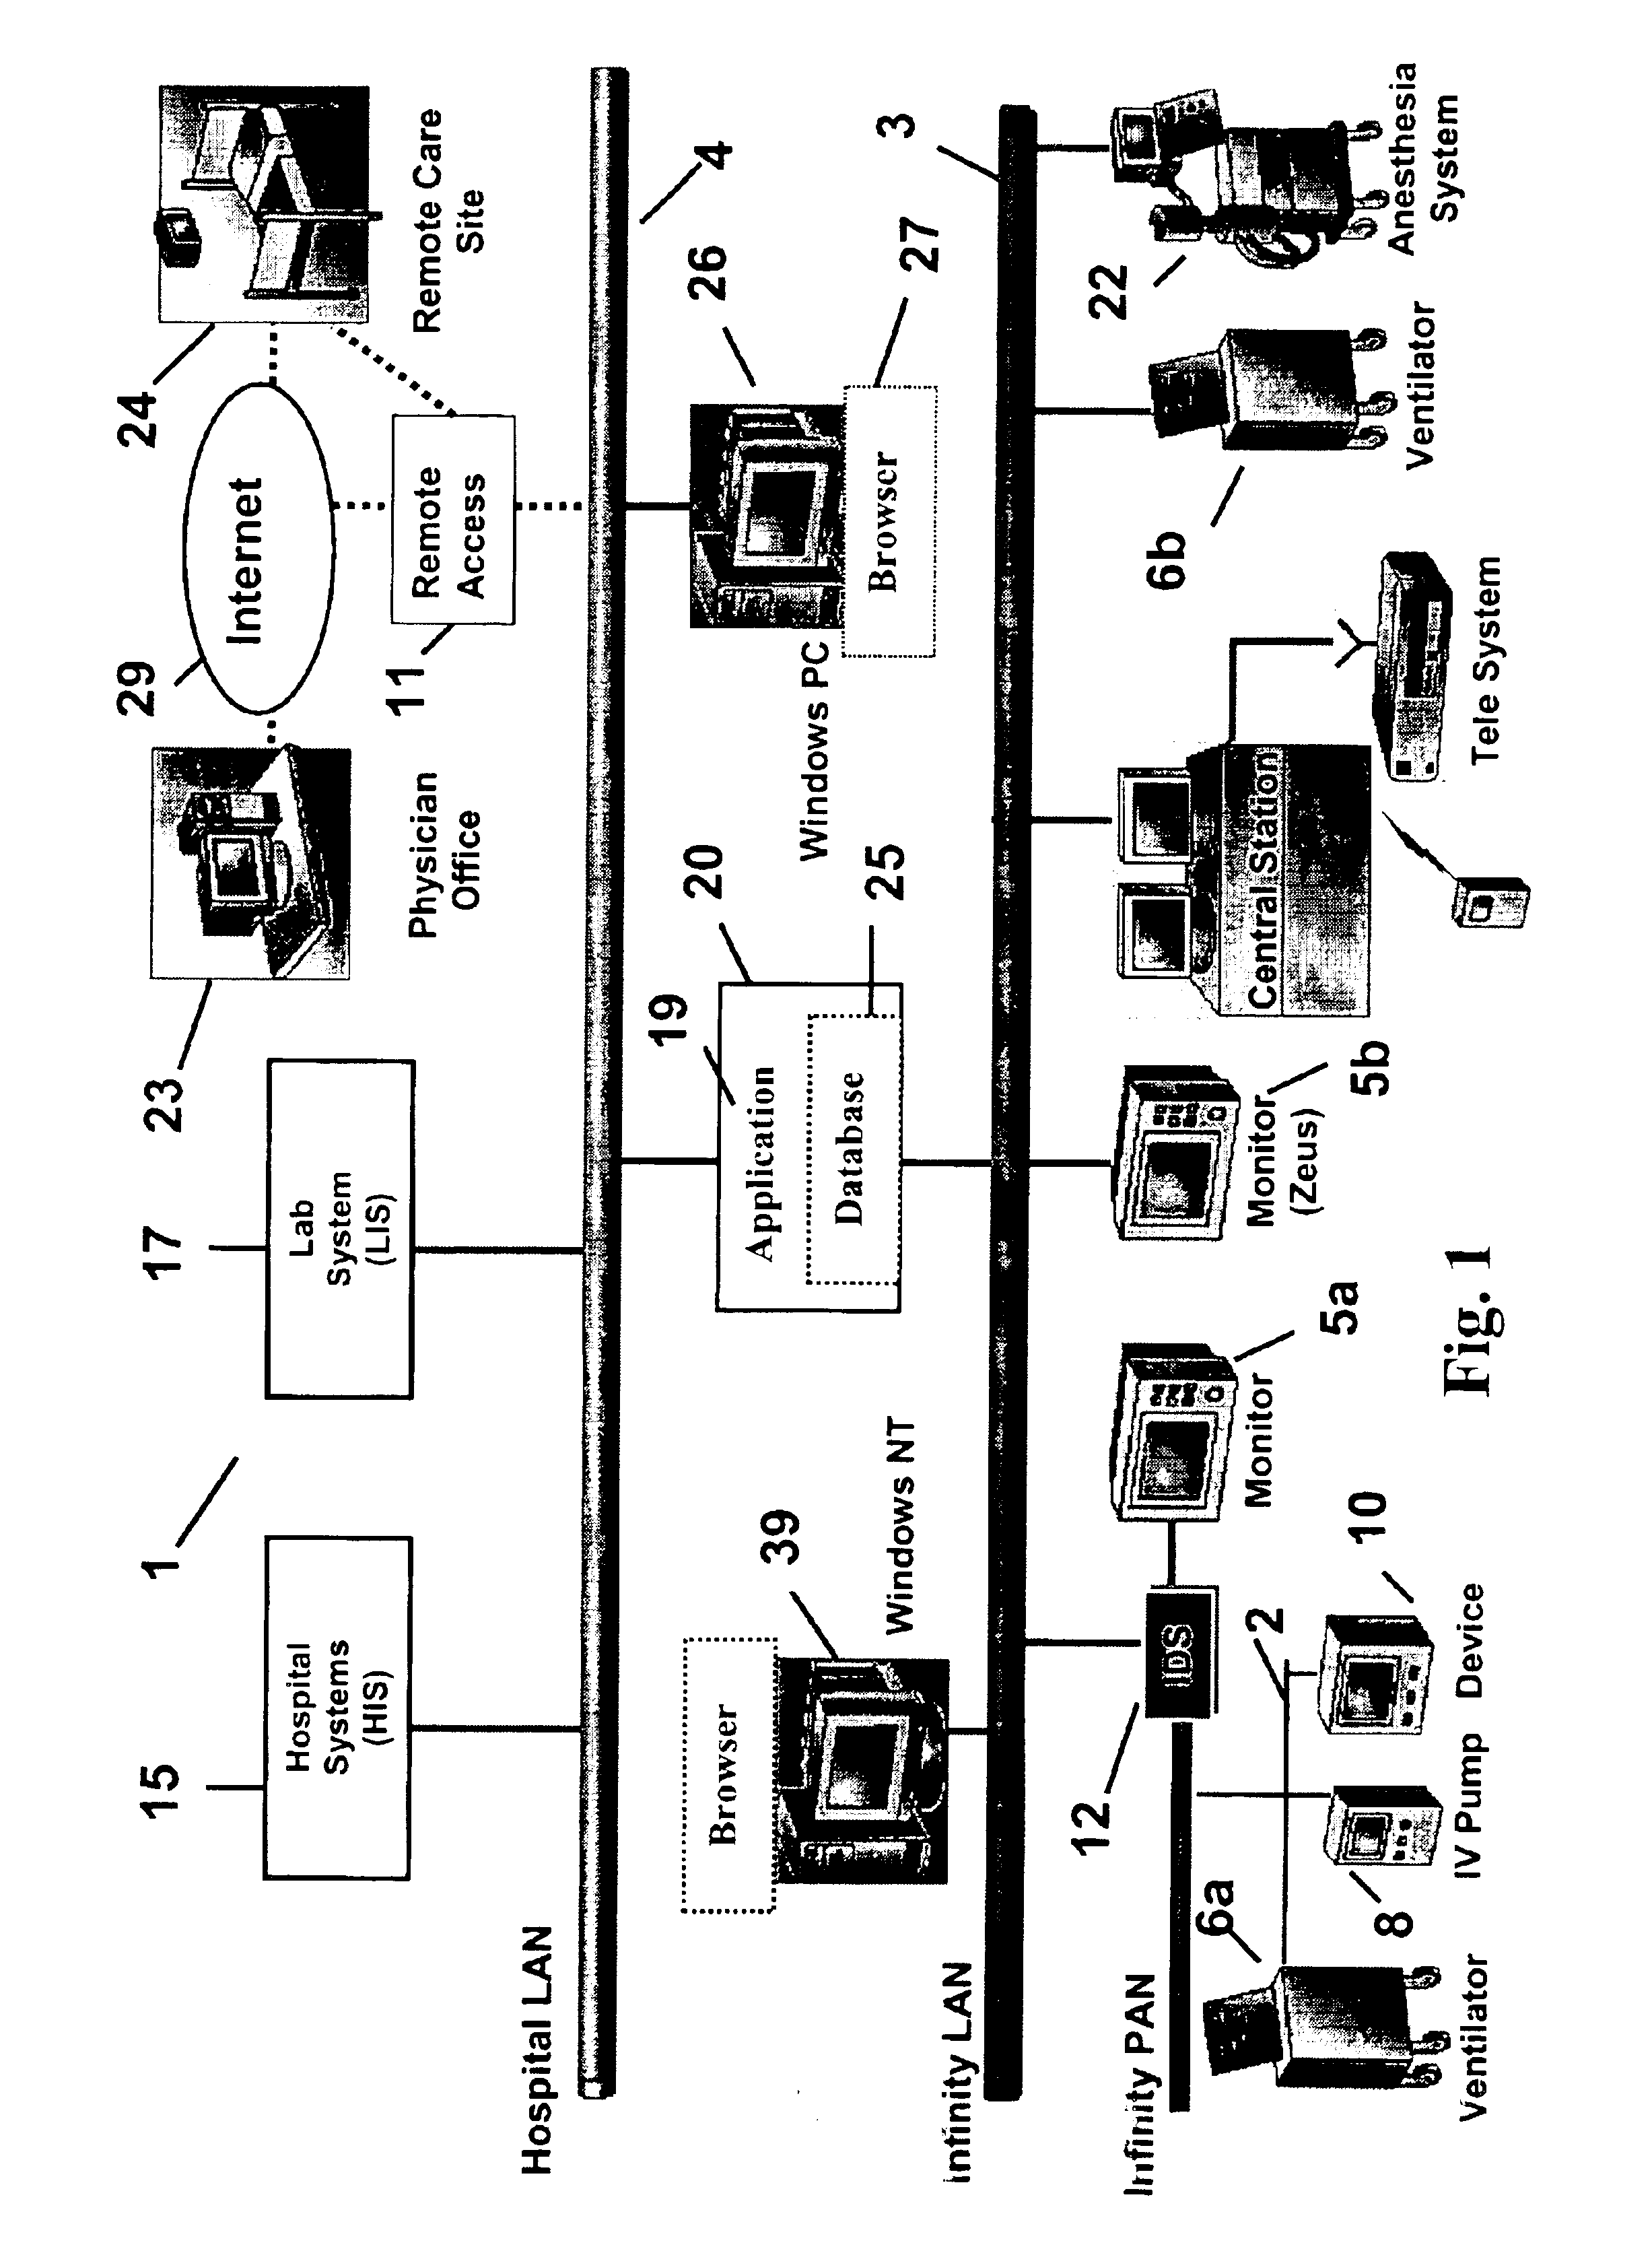 Patient medical parameter user interface system